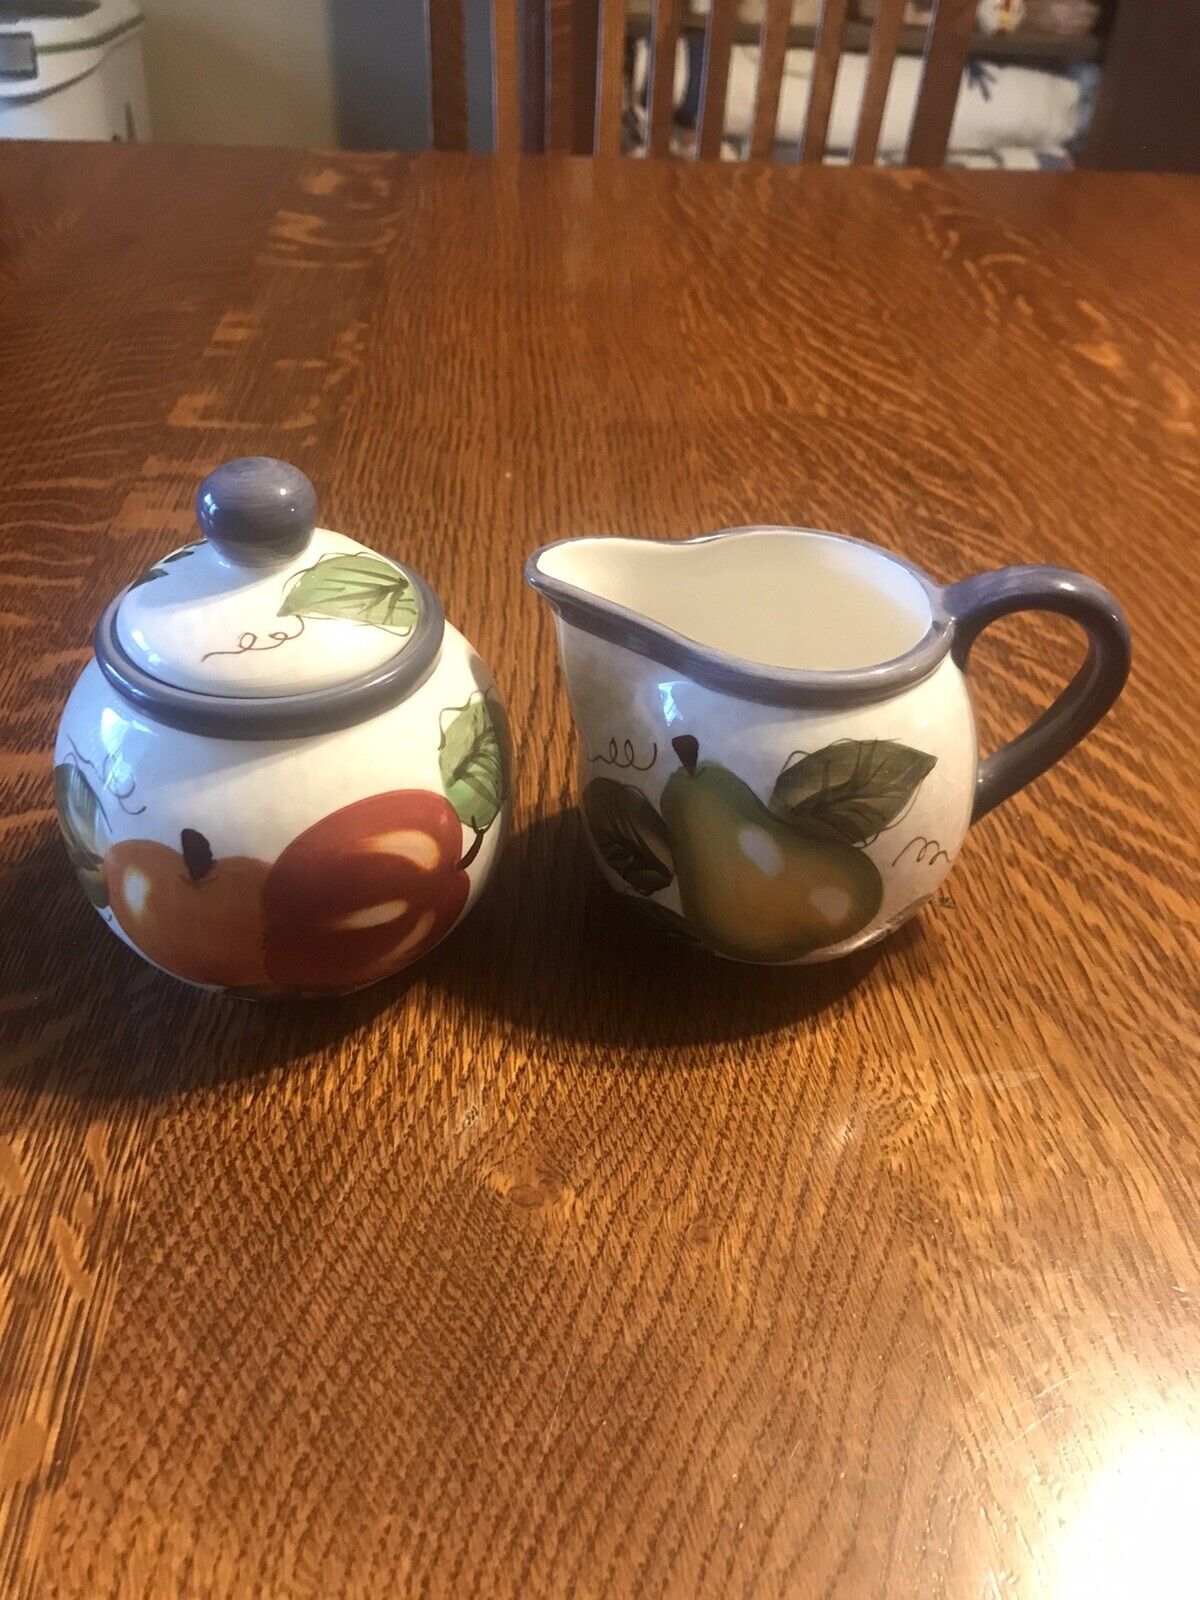 Oneida Vintage Fruit Creamer and Sugar Bowl Hand Painted Good used condition